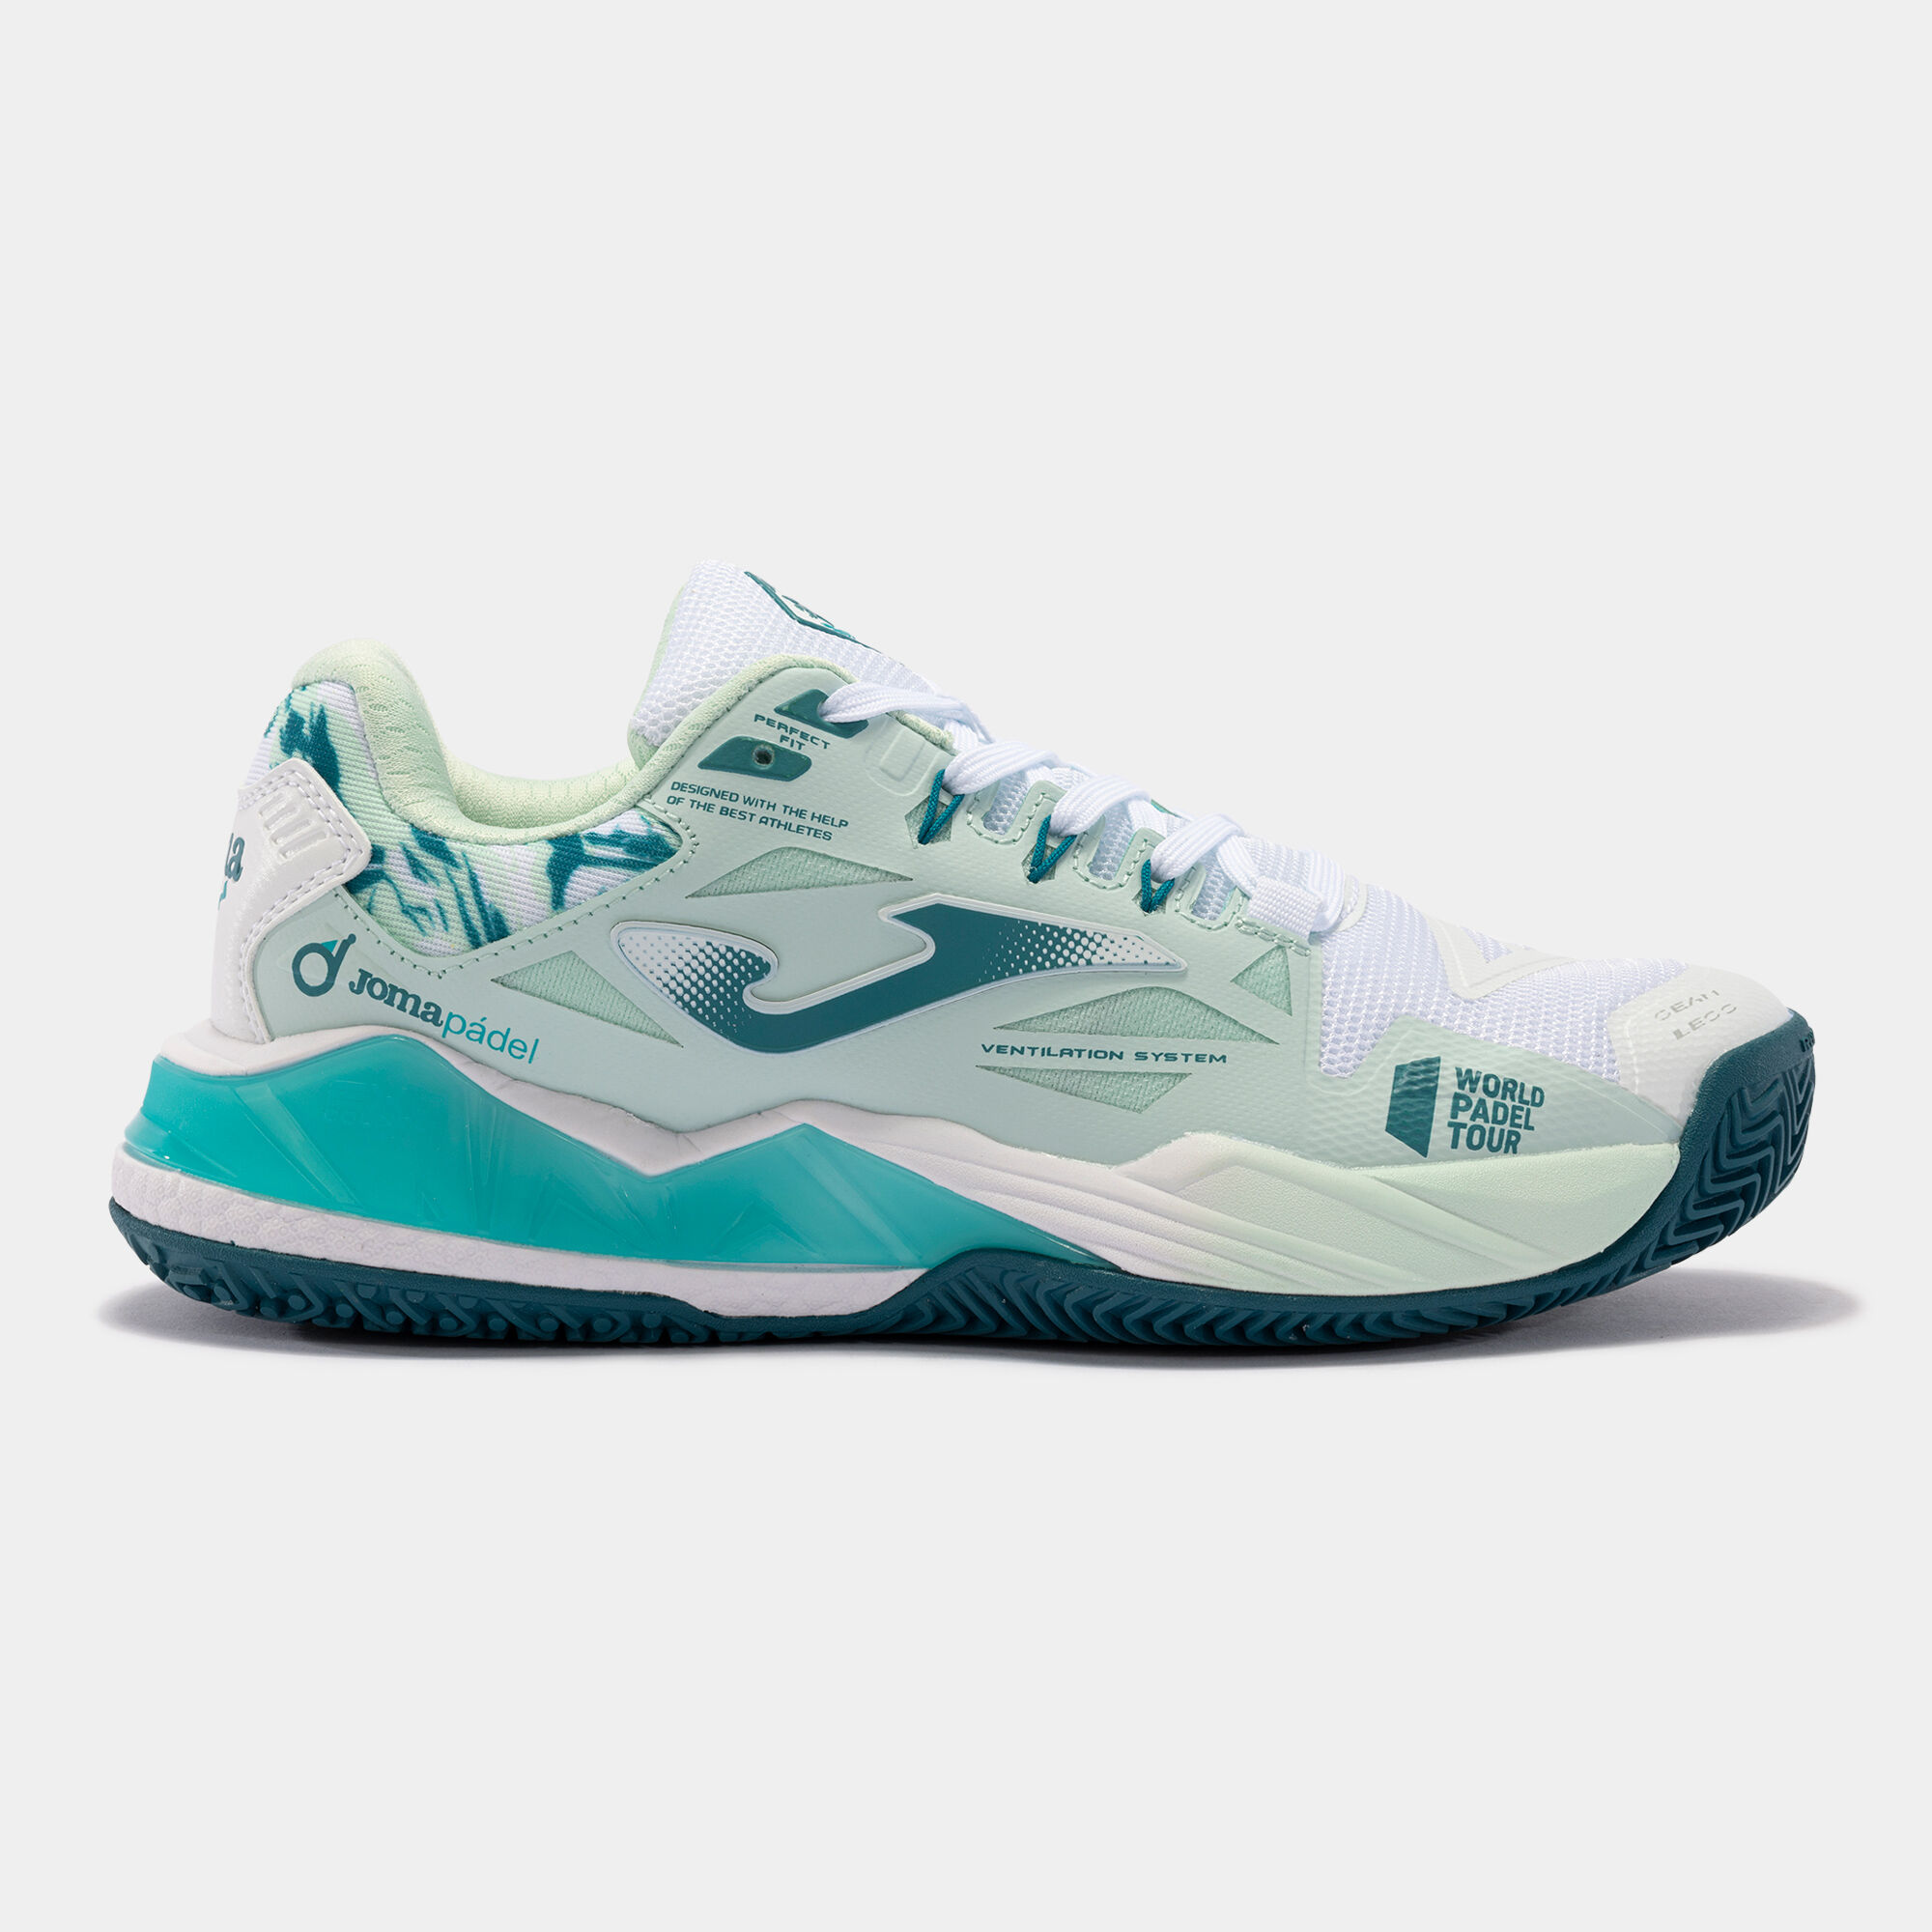 Chaussures T.Spin Lady 23 terre battue femme turquoise blanc